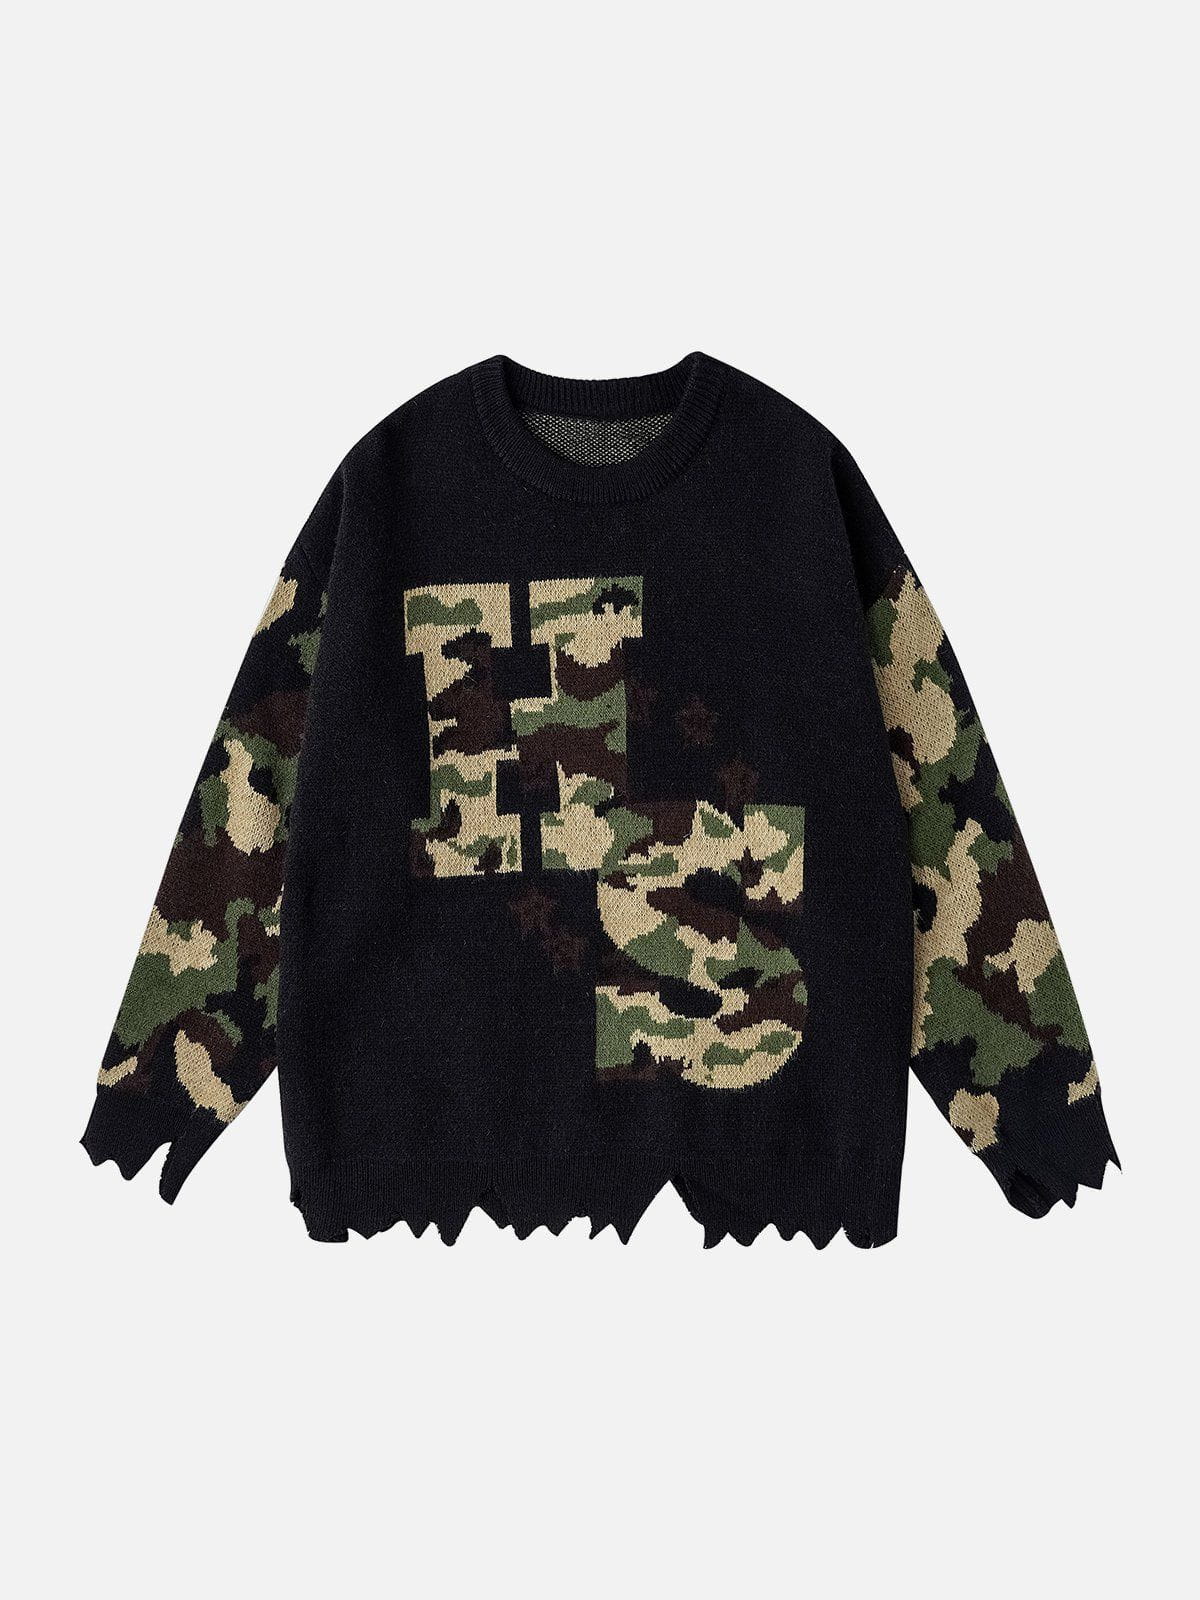 Majesda® - Patchwork Camouflage Sweater outfit ideas streetwear fashion